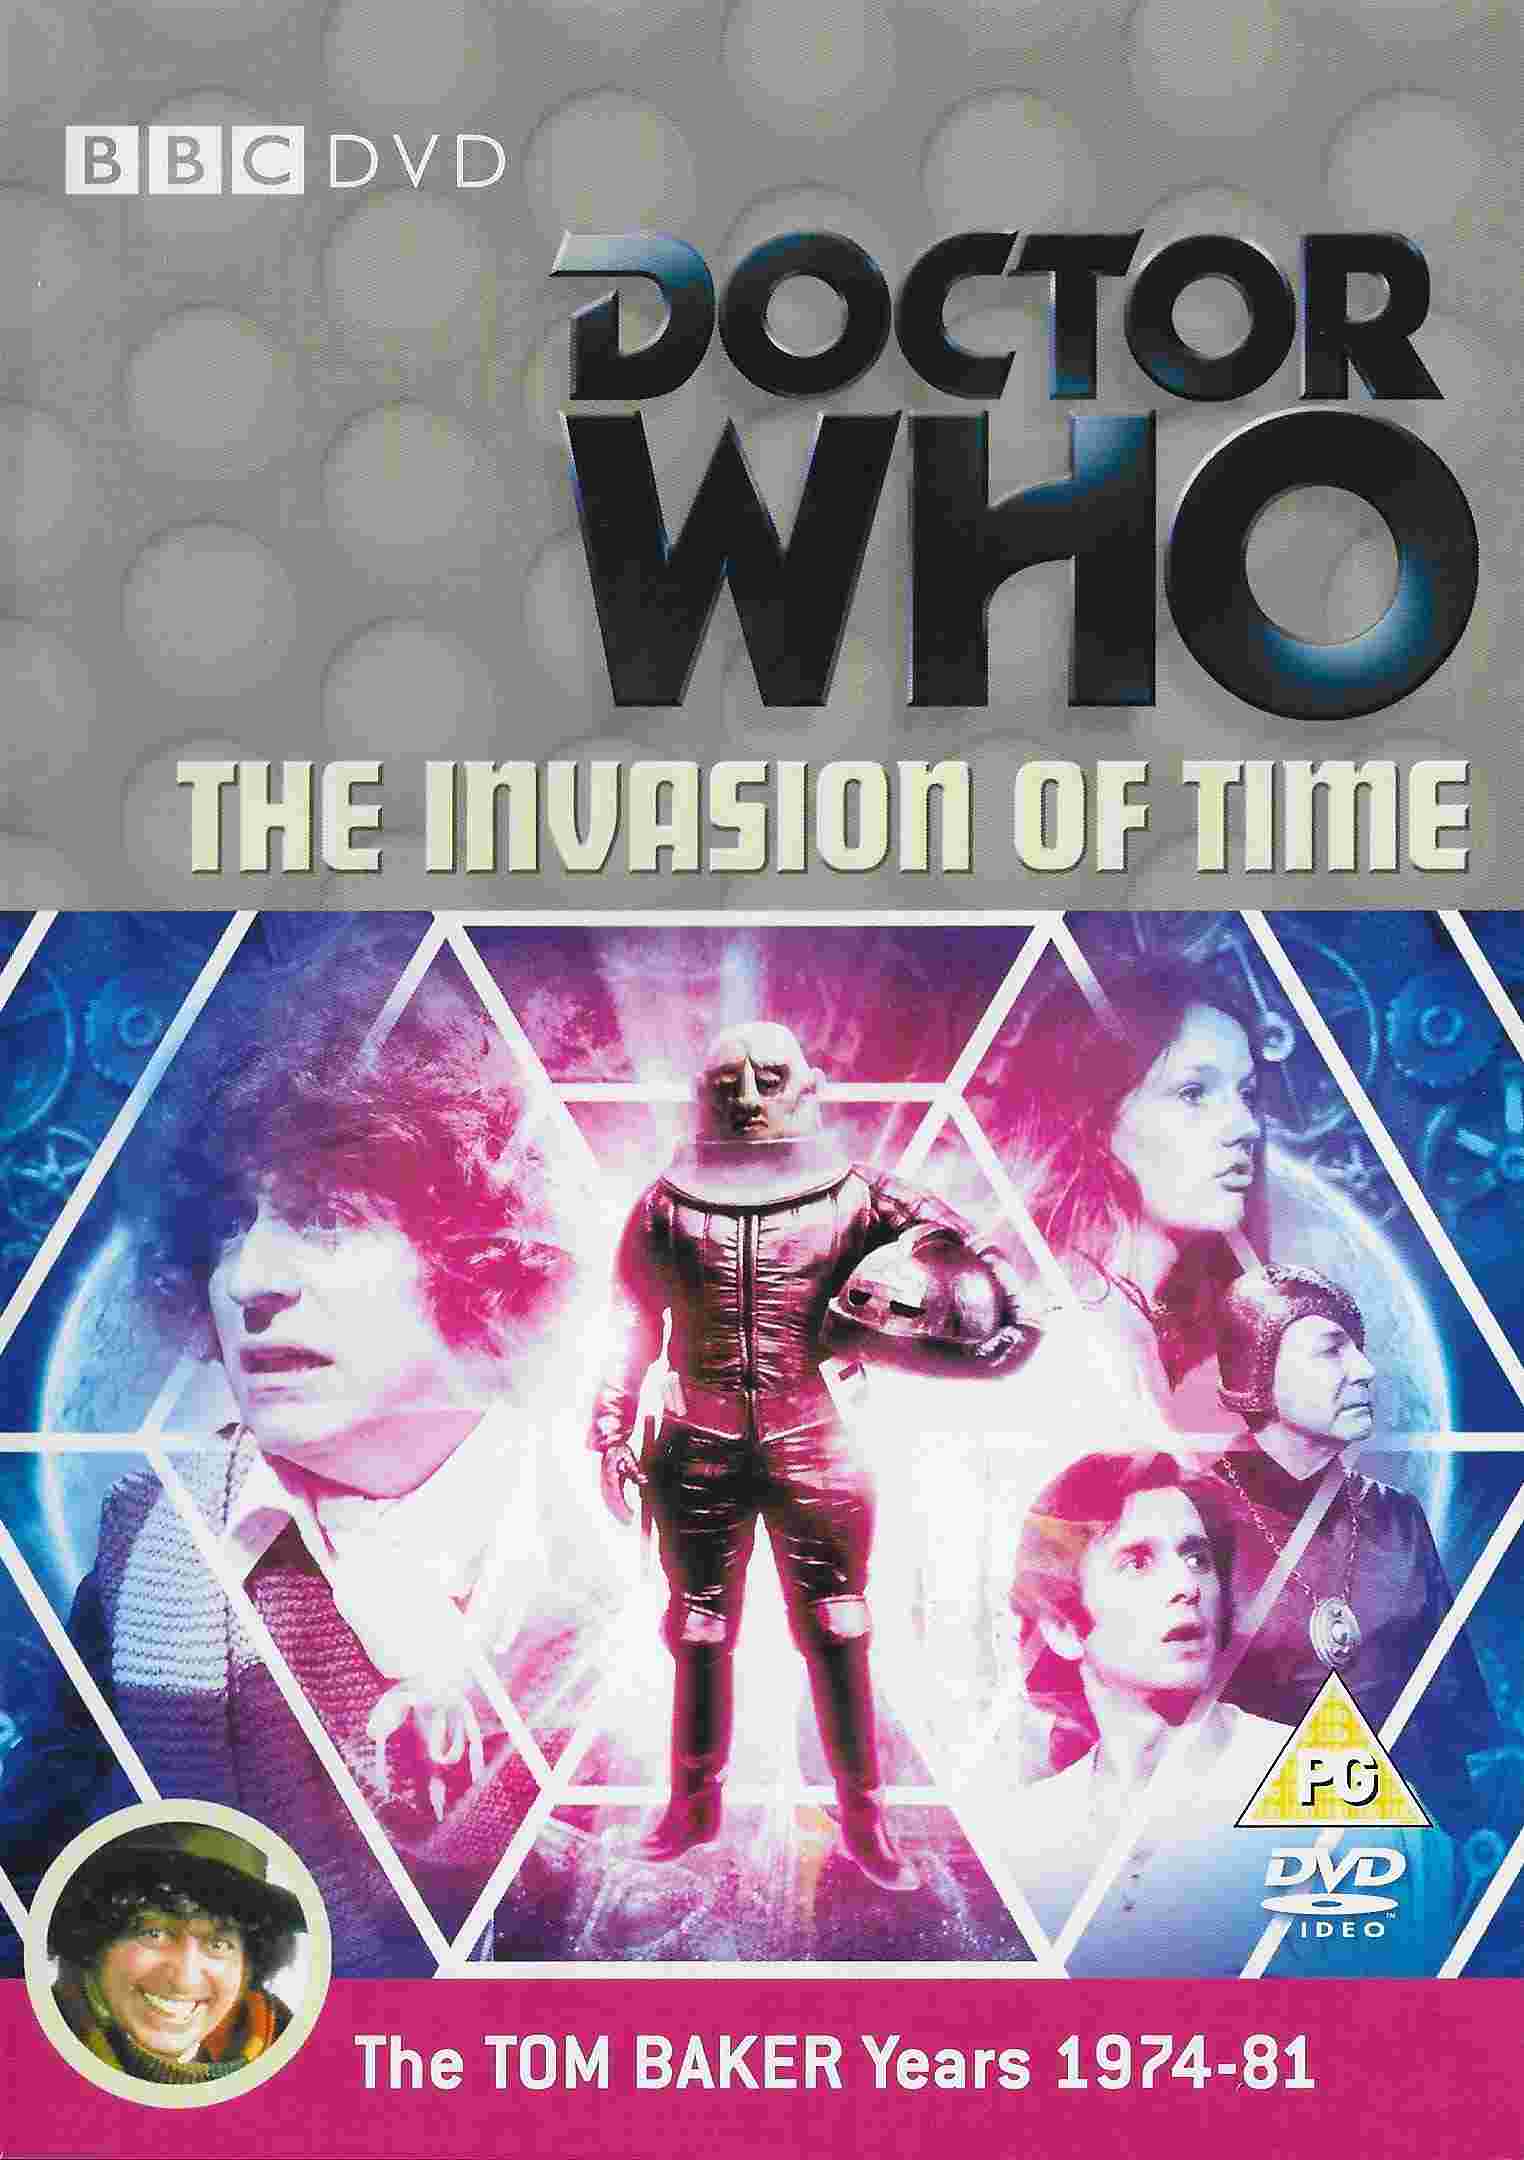 Picture of BBCDVD 2586 Doctor Who - The invasion of time by artist David Agnew from the BBC records and Tapes library